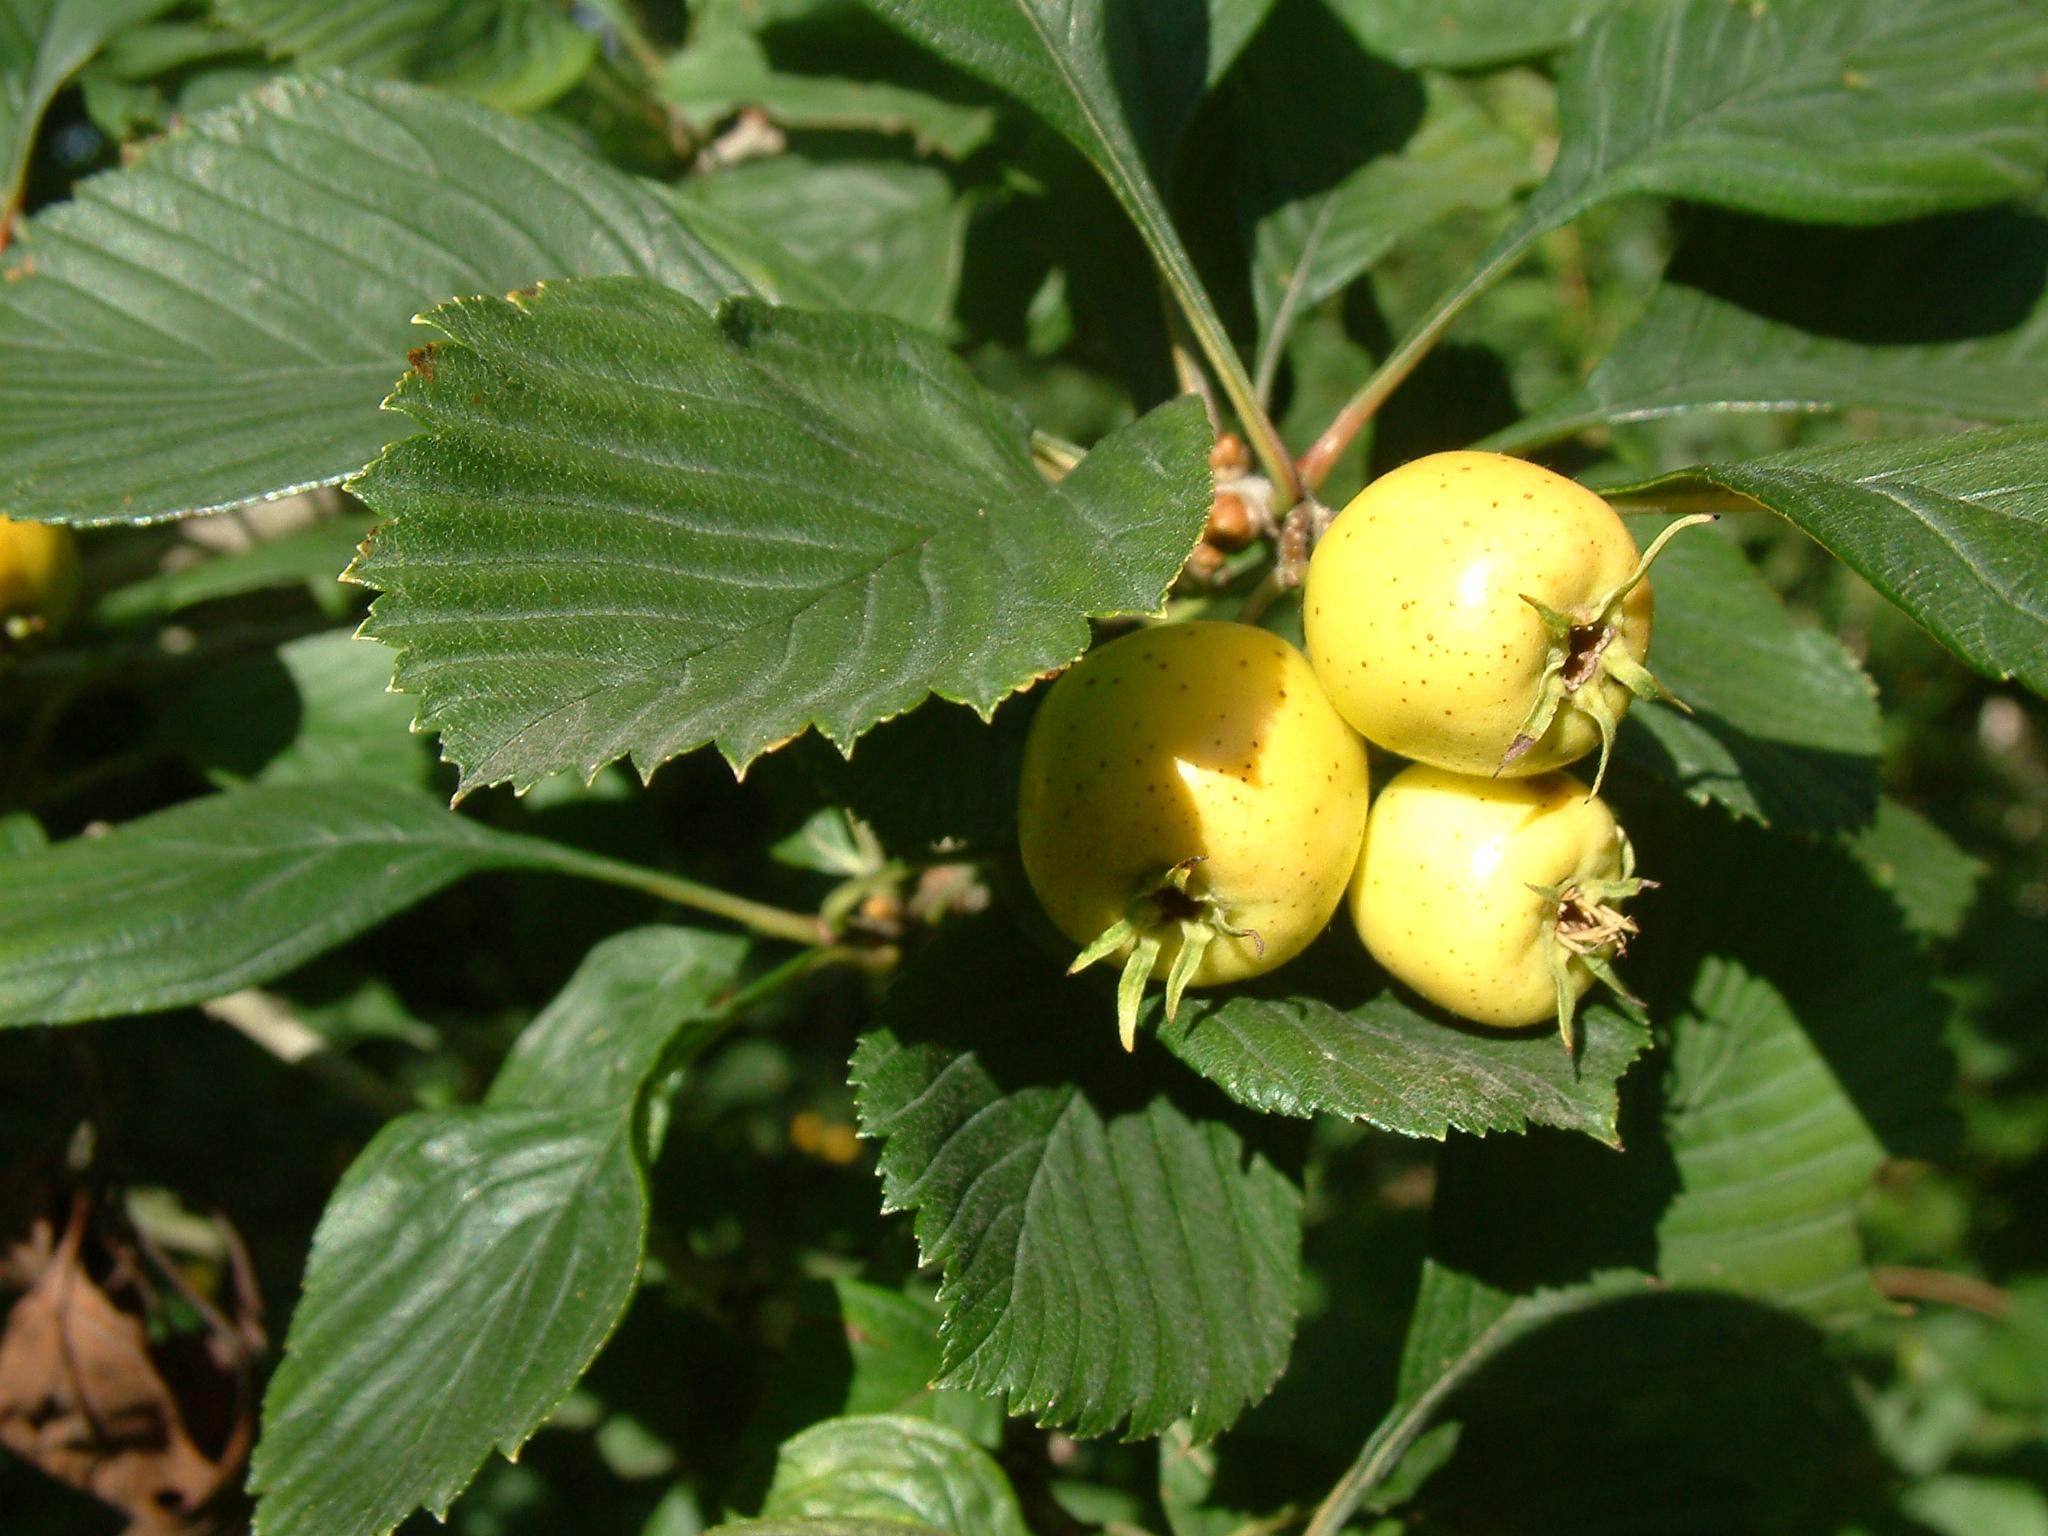 yellow fruits with green leaves and green-brown stems